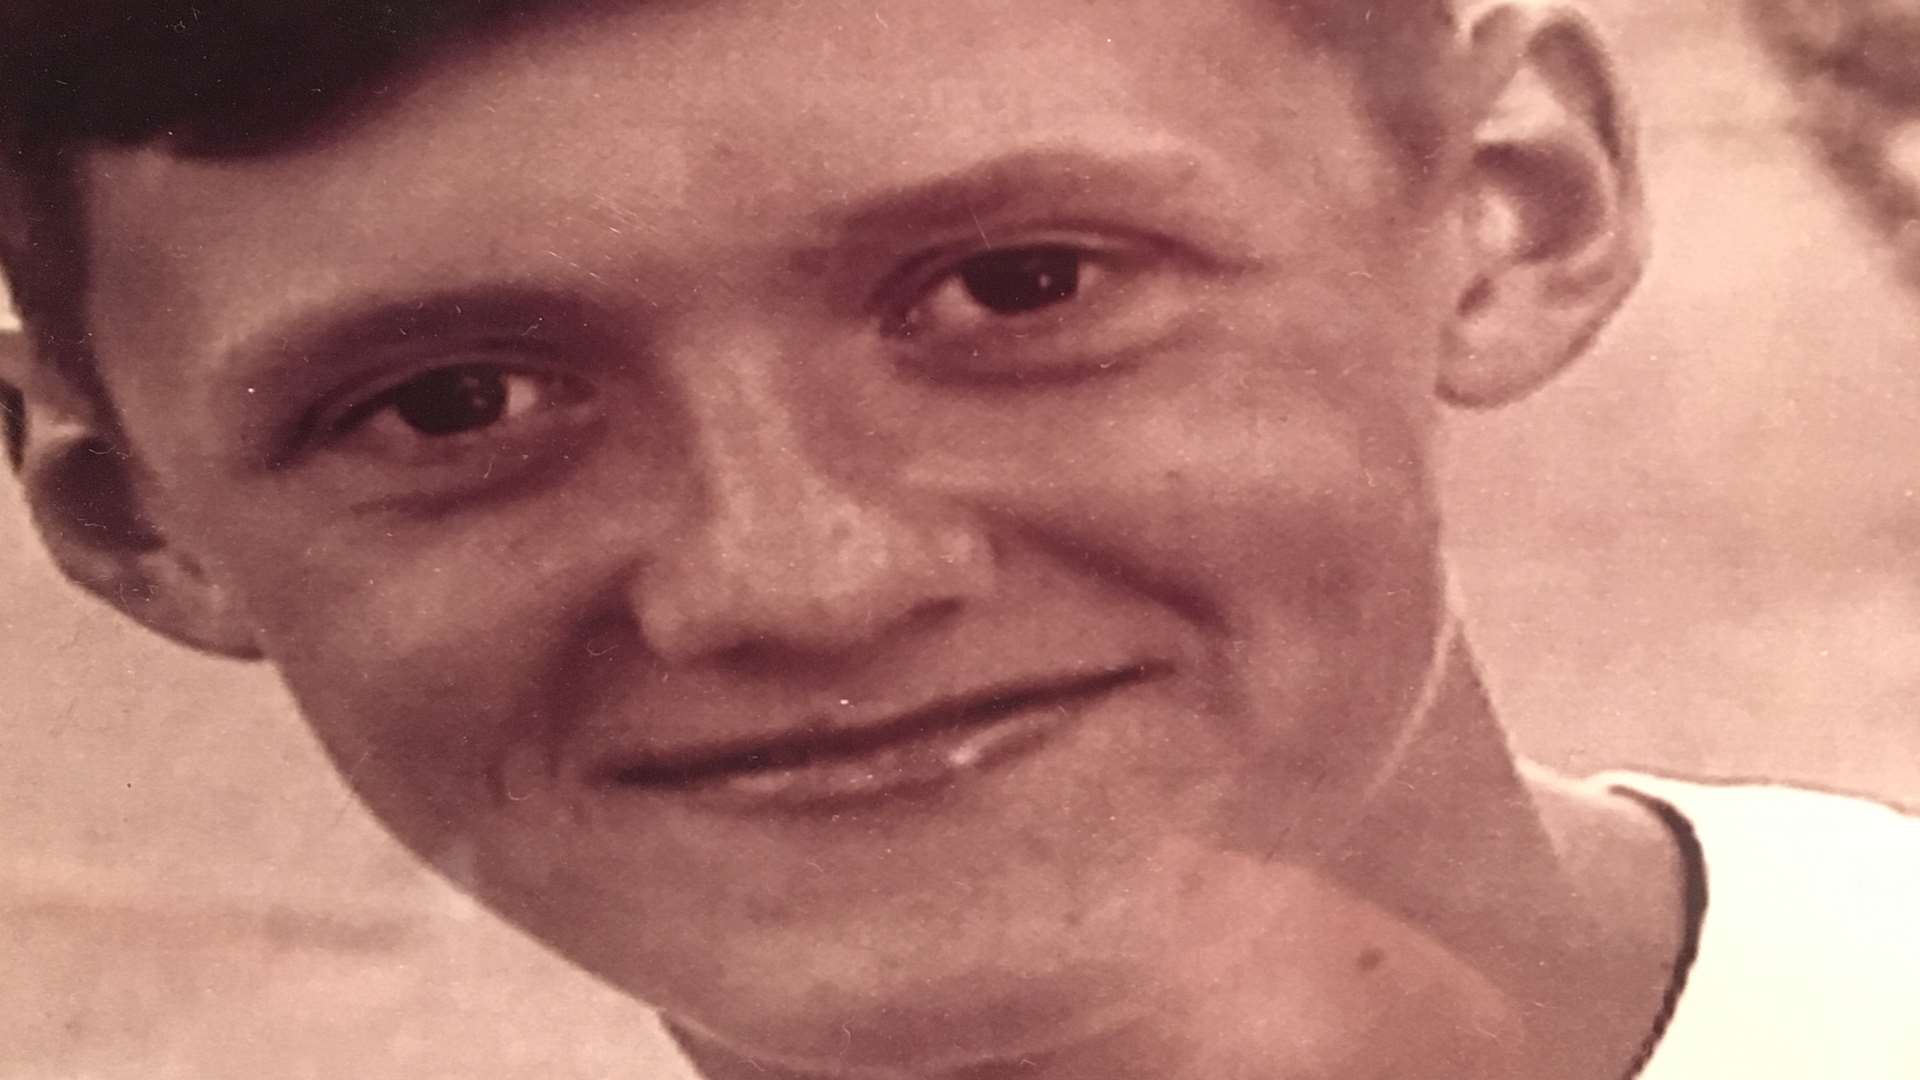 Mason Mercer, 16, was found dead at his home in September